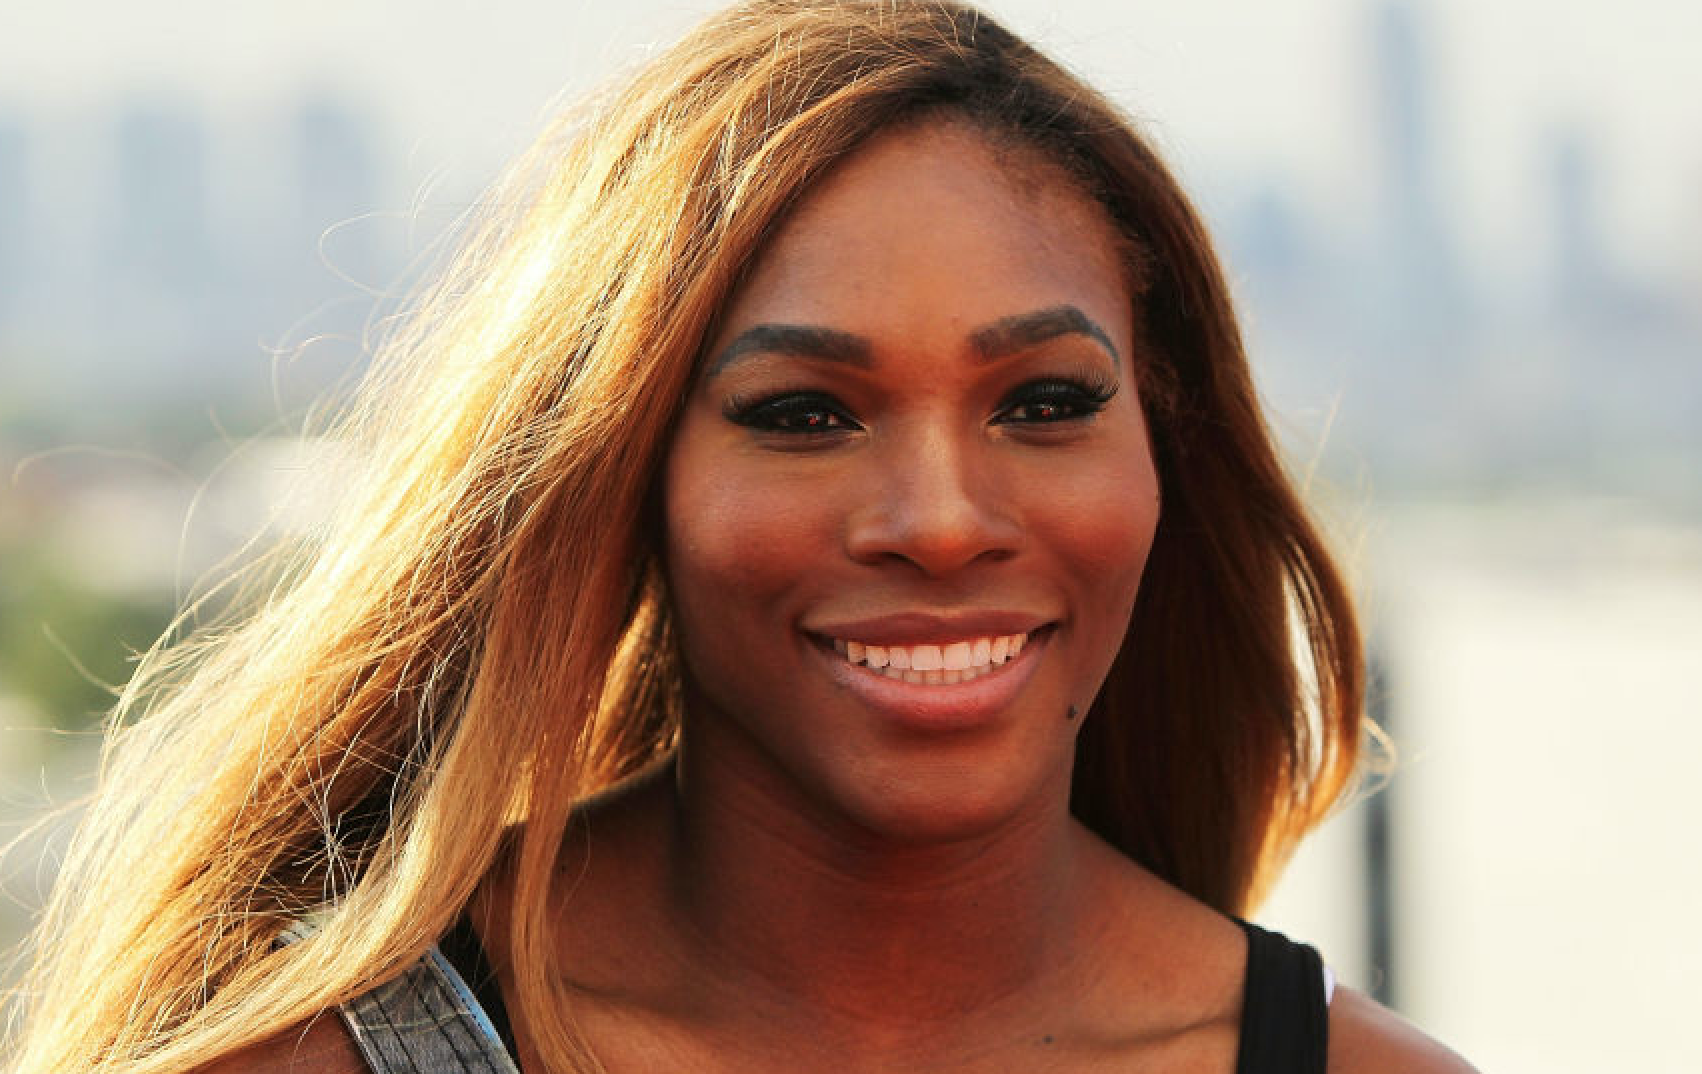 Serena Williams had a pretty stunning bridesmaid dress for her sister-in-law’s wedding